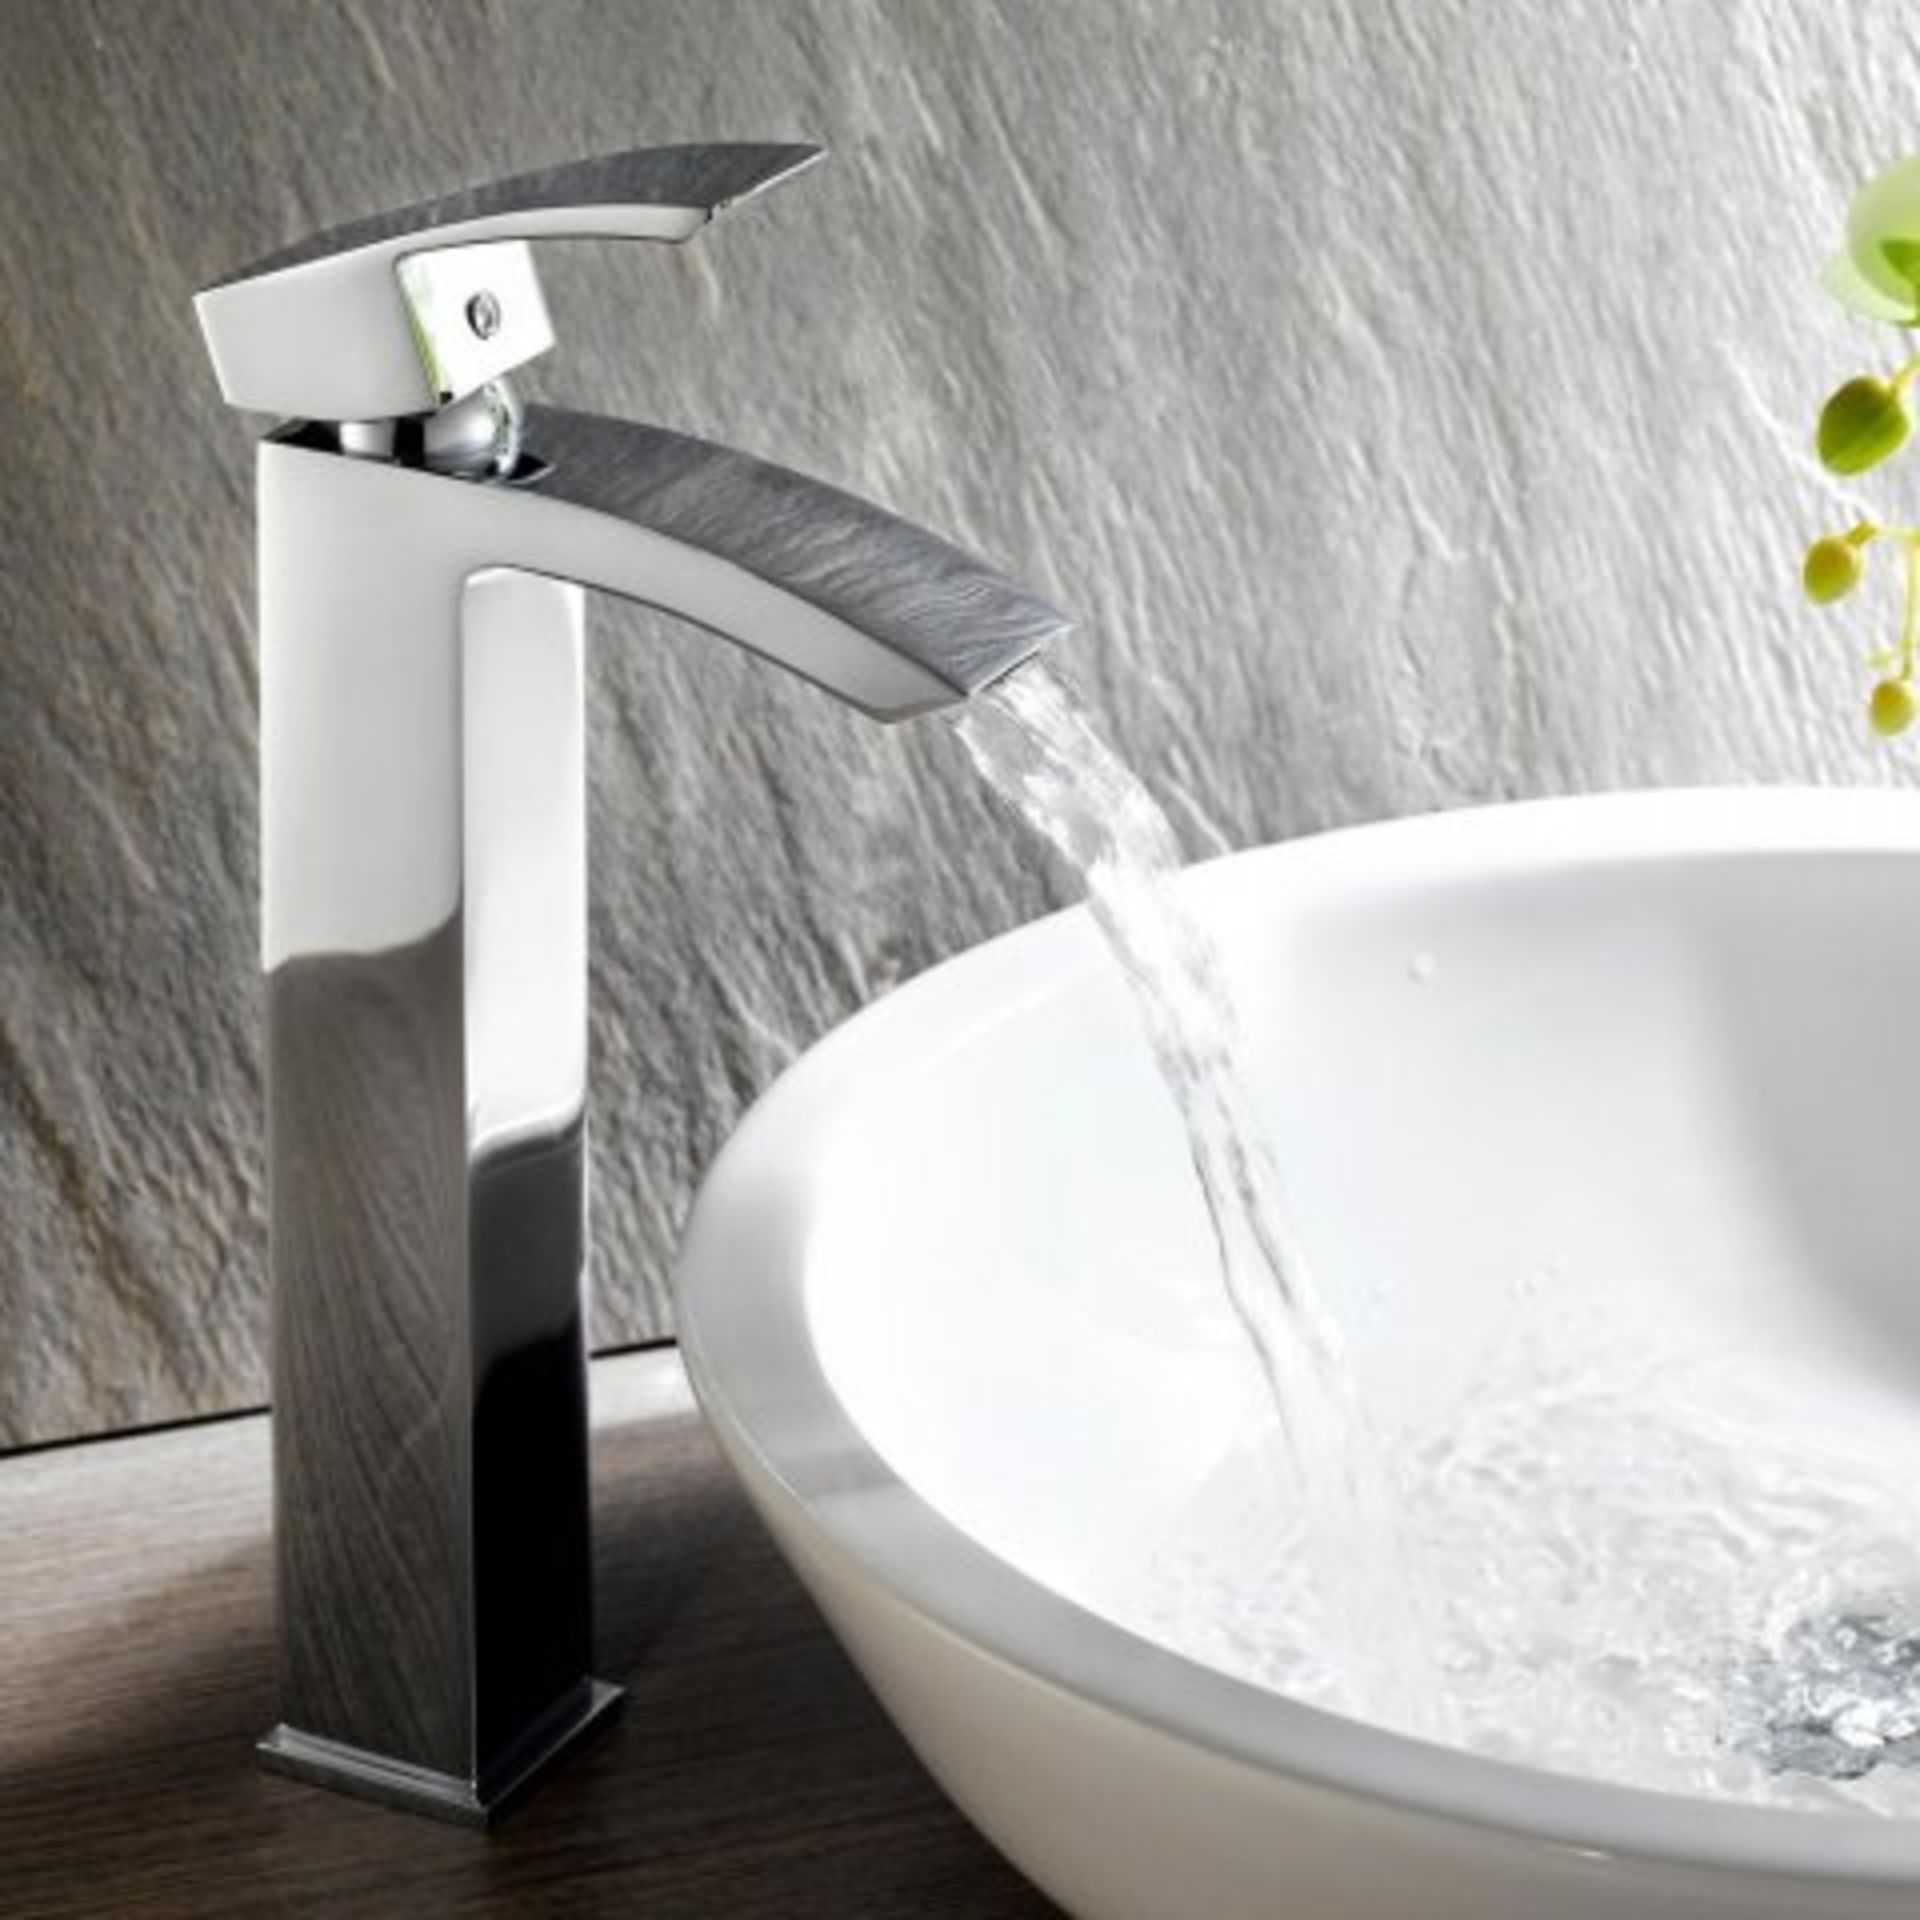 (V105) Keila Counter Top Basin Mixer Tap Countertop Elegance Our counter top tap proves to be an